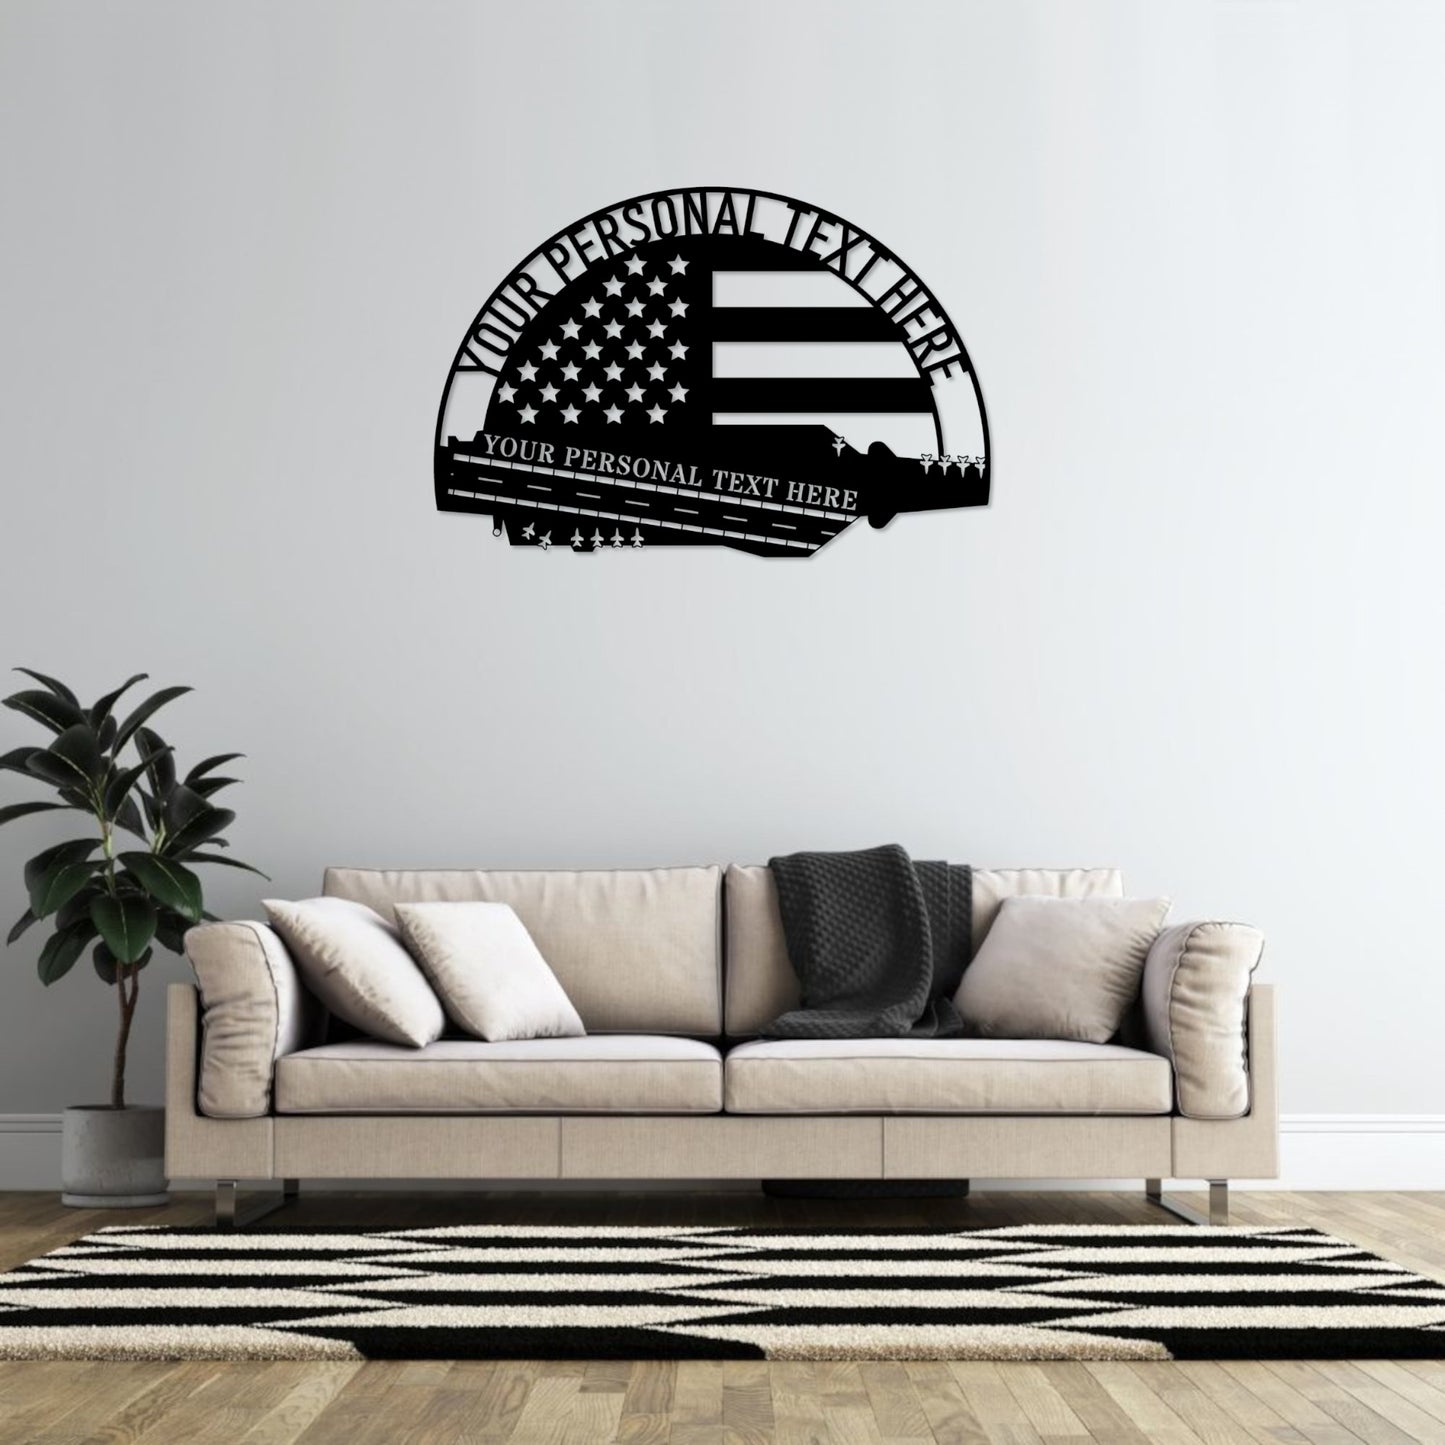 Personalized American Warship Metal Sign. Custom US Aircraft Carrier Wall Decor Gift. Navy Retirement. Military Wall Hanging. Army Sign Gift